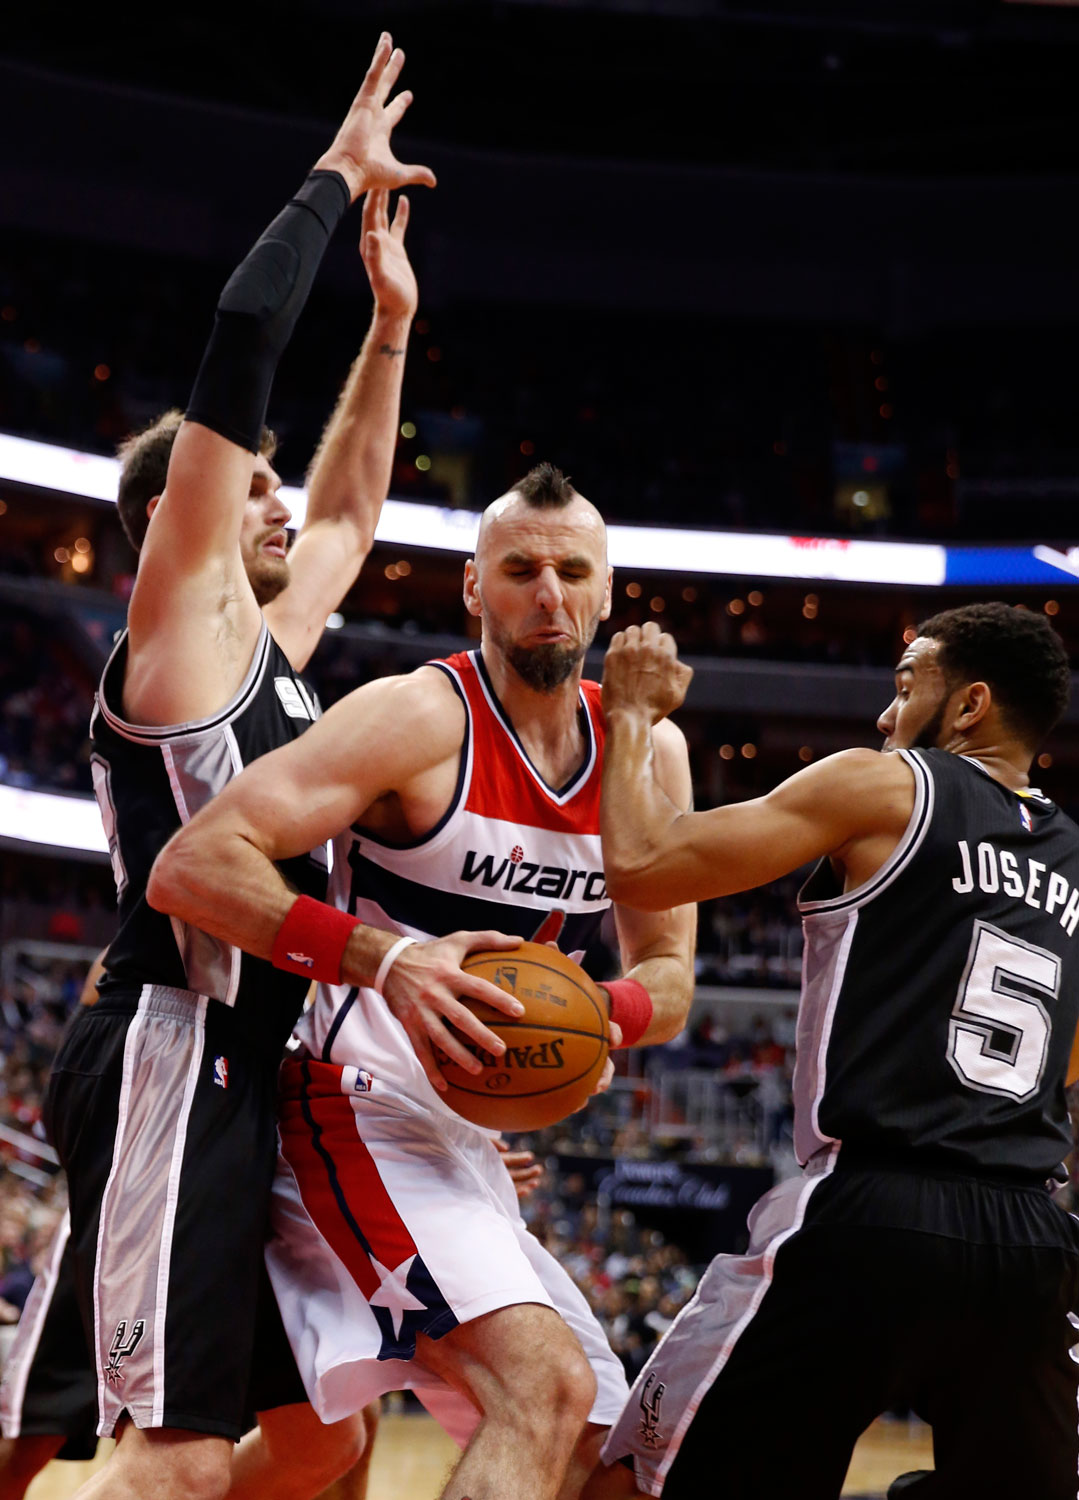 Wizards’ Marcin Gortat shaves off mohawk after low-scoring game